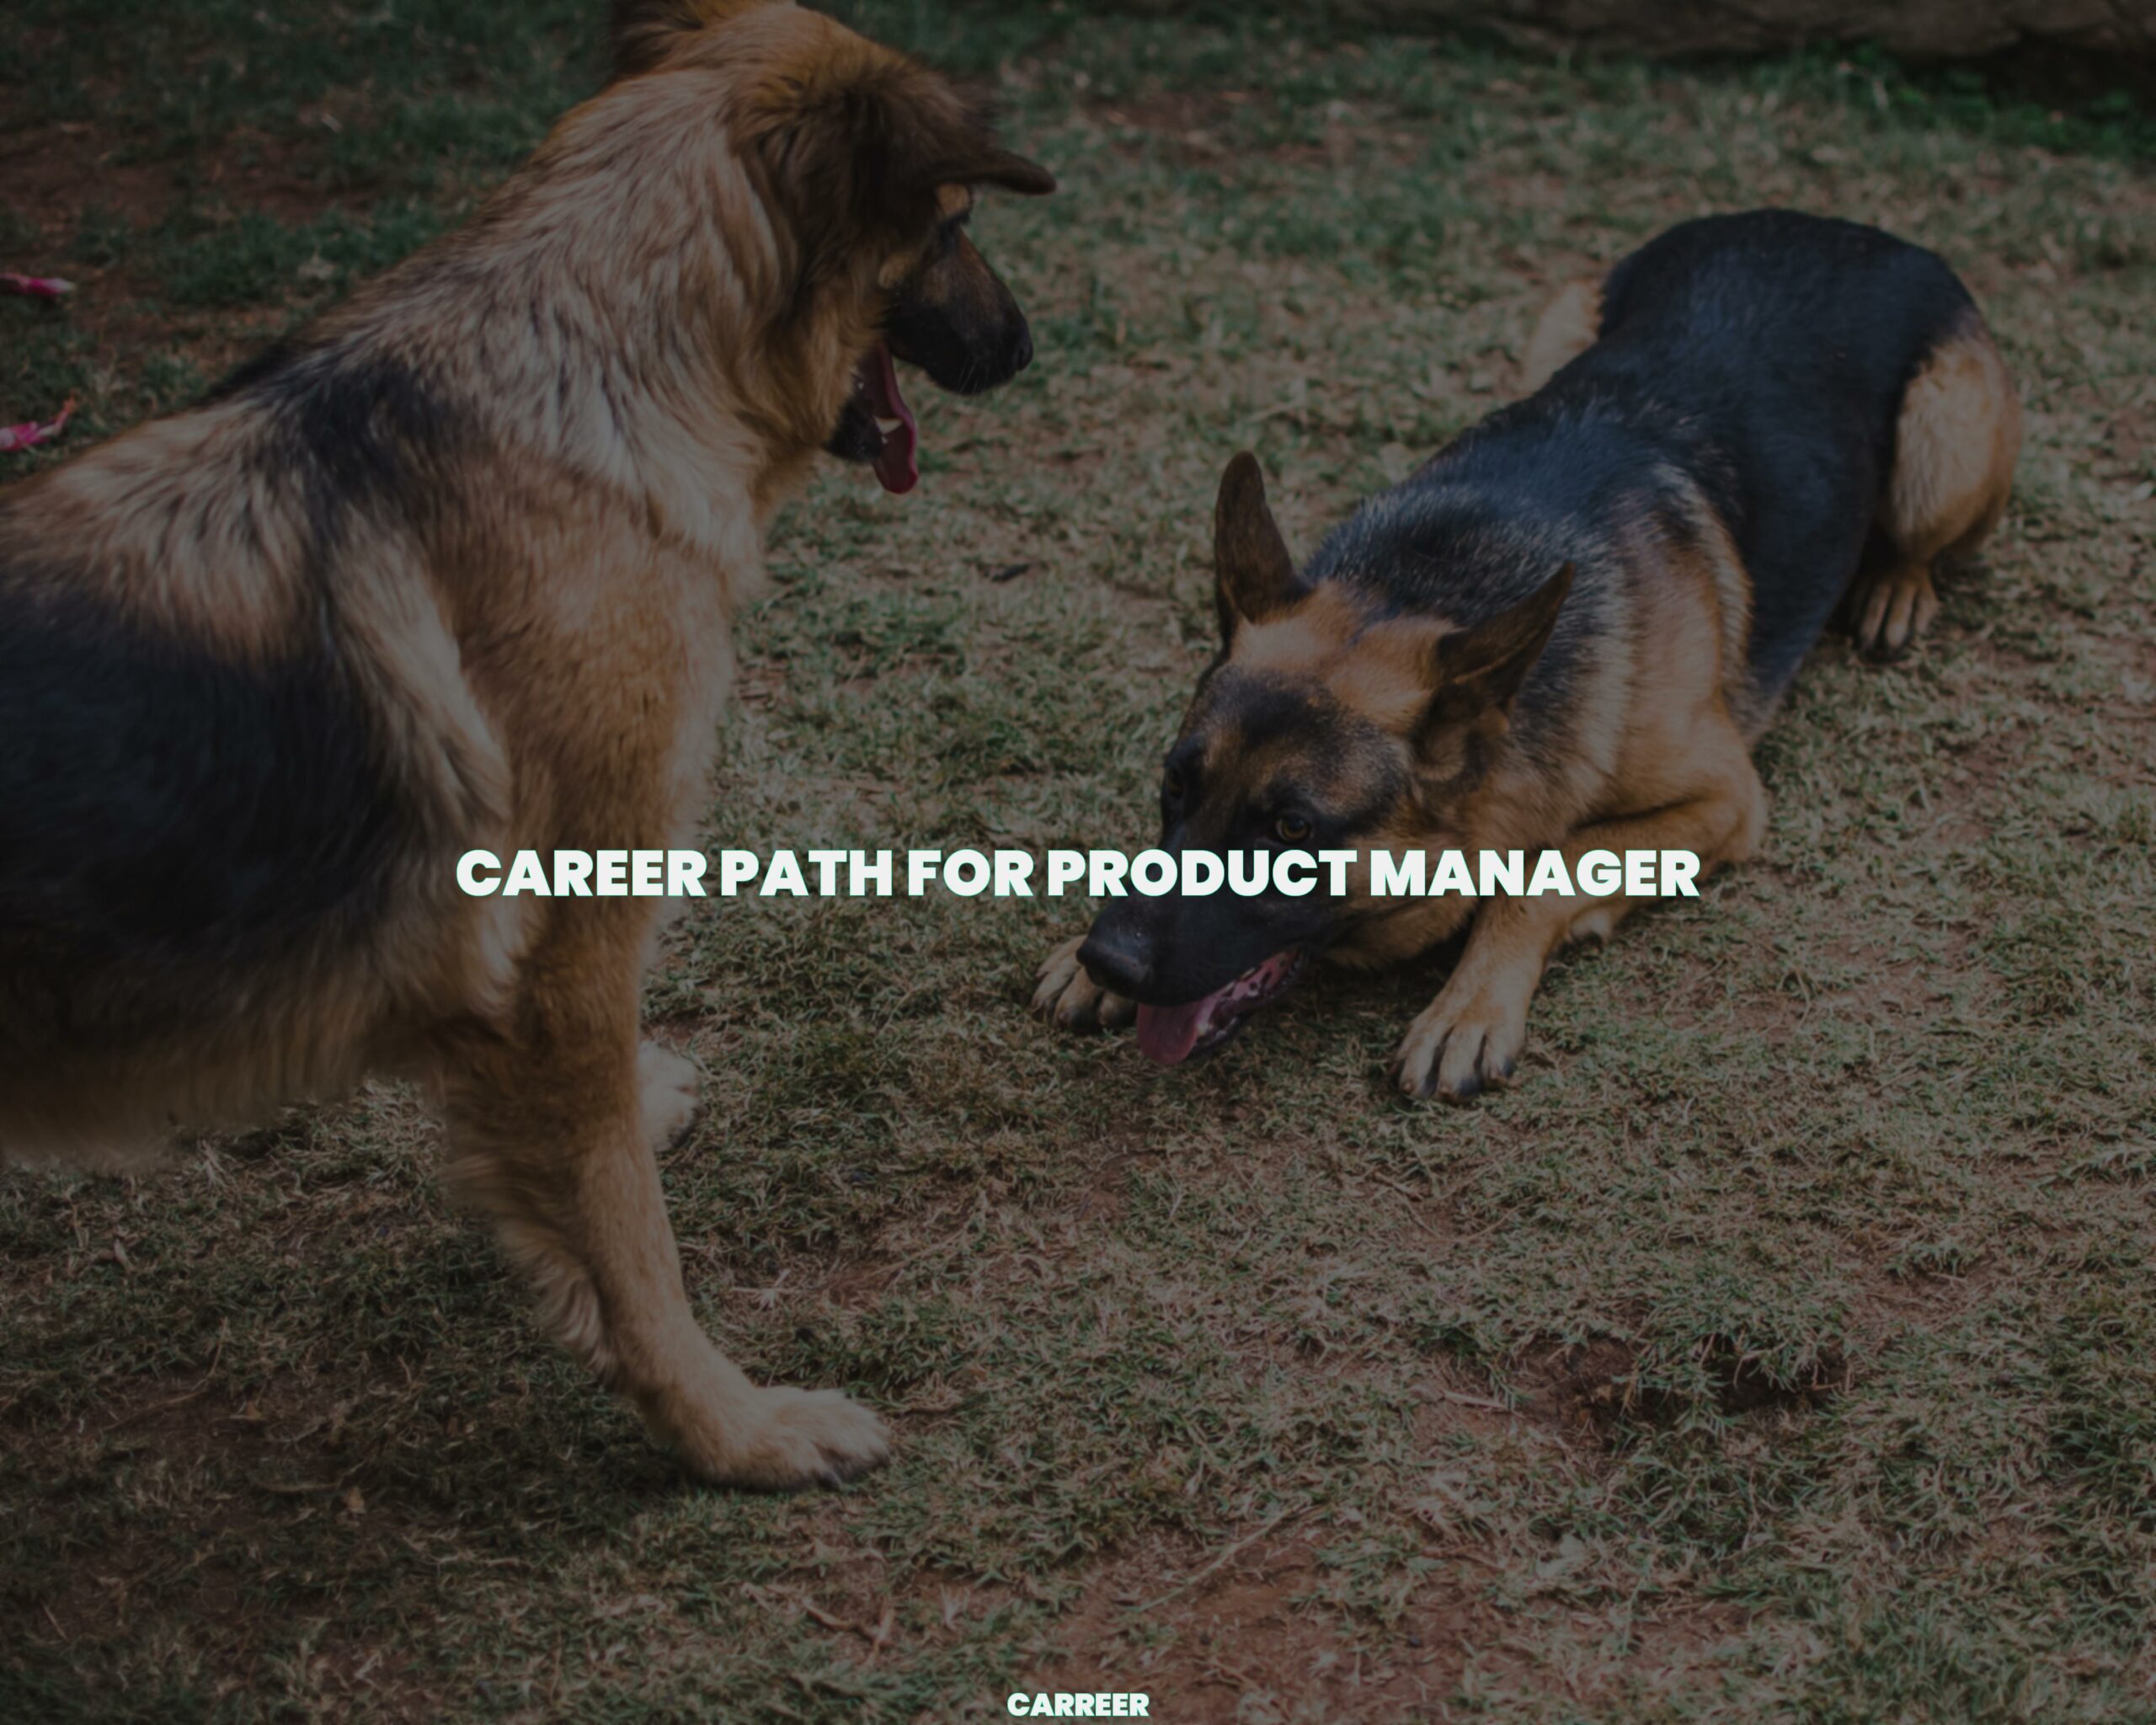 Career path for product manager